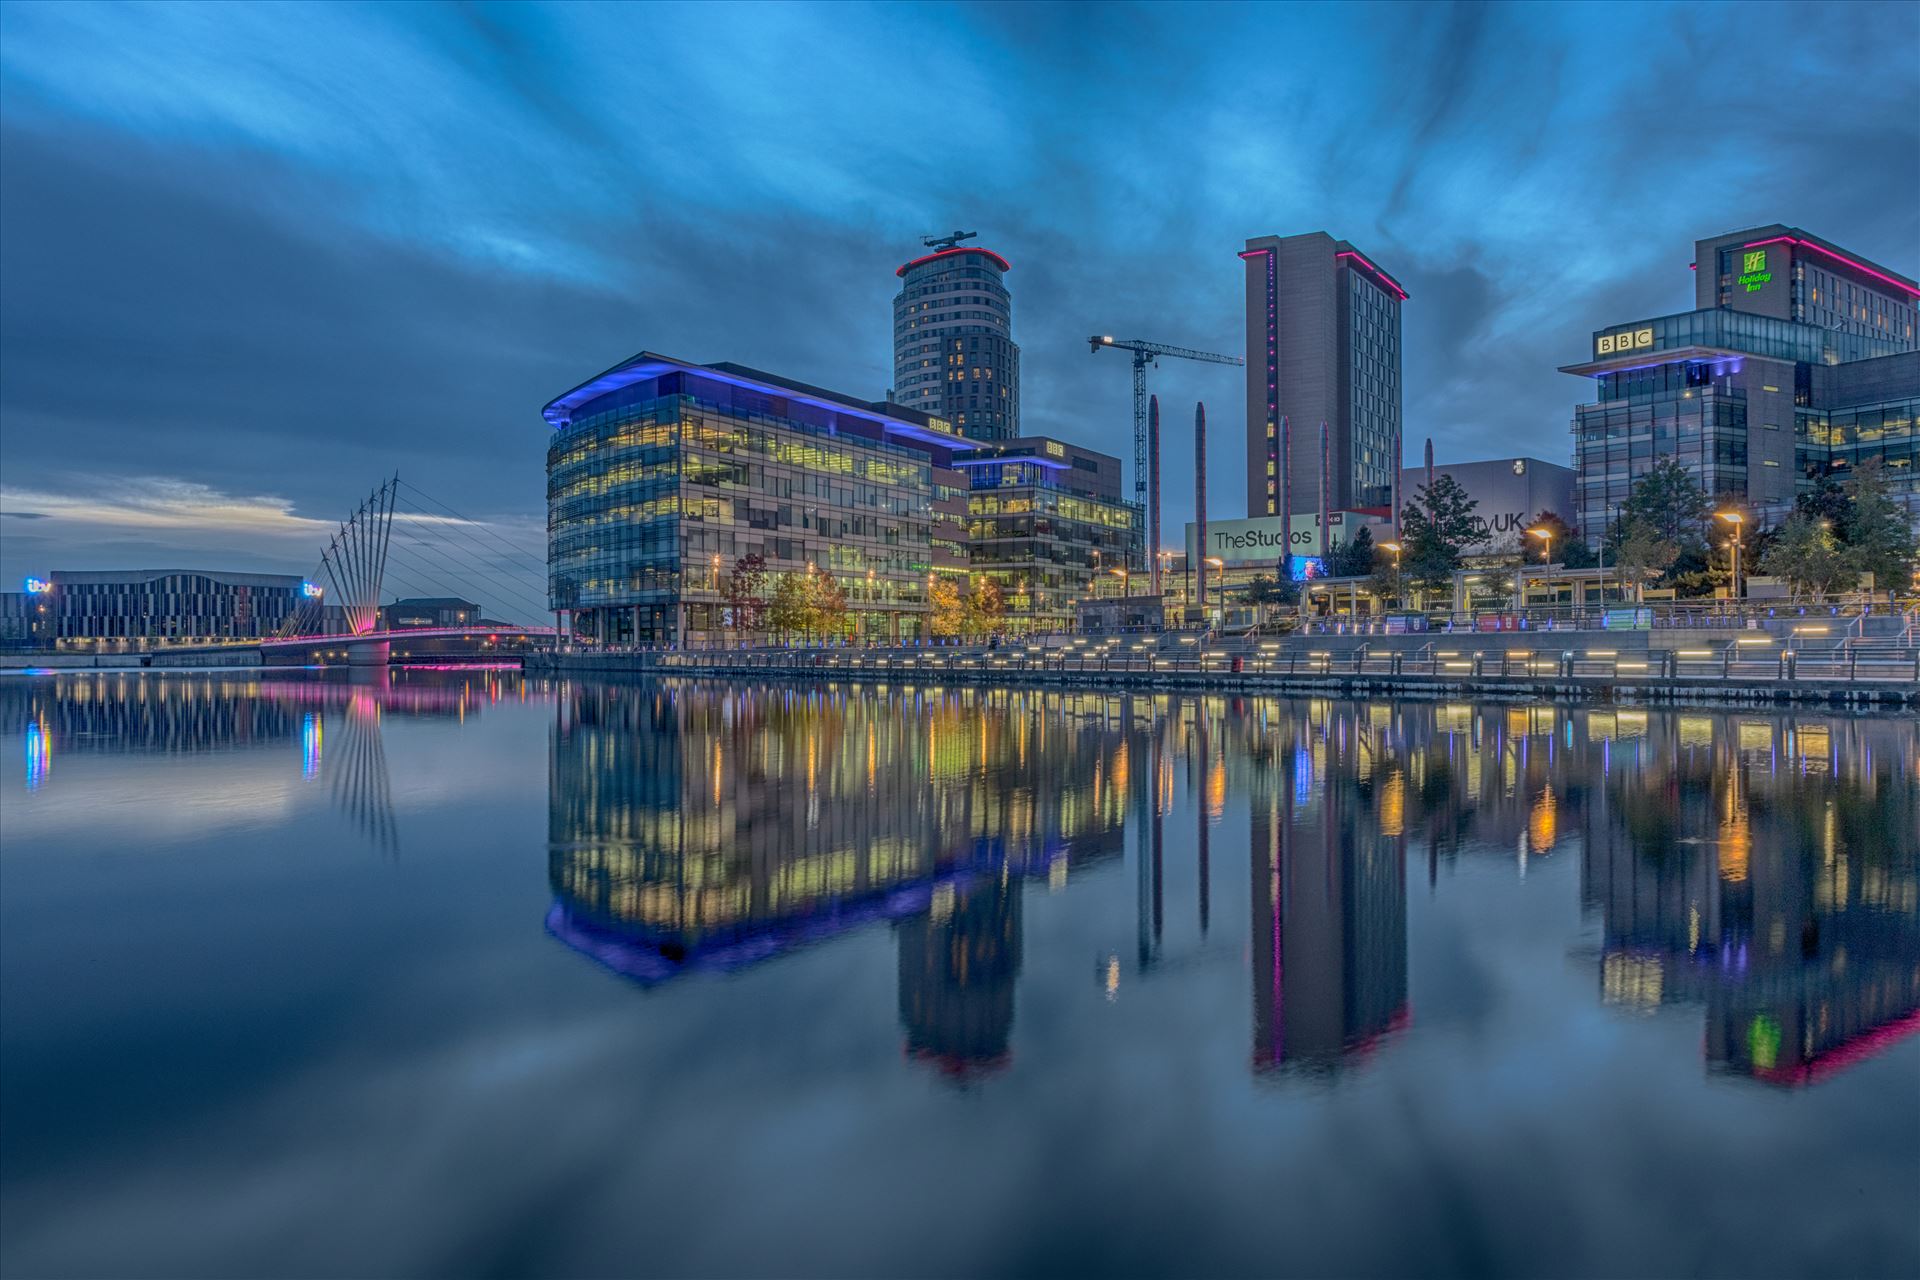 Blue Hour at Media City Long exposure shot at Media City at Salford Quays near Manchester during "blue hour" as night is falling.  by Tony Keogh Photography